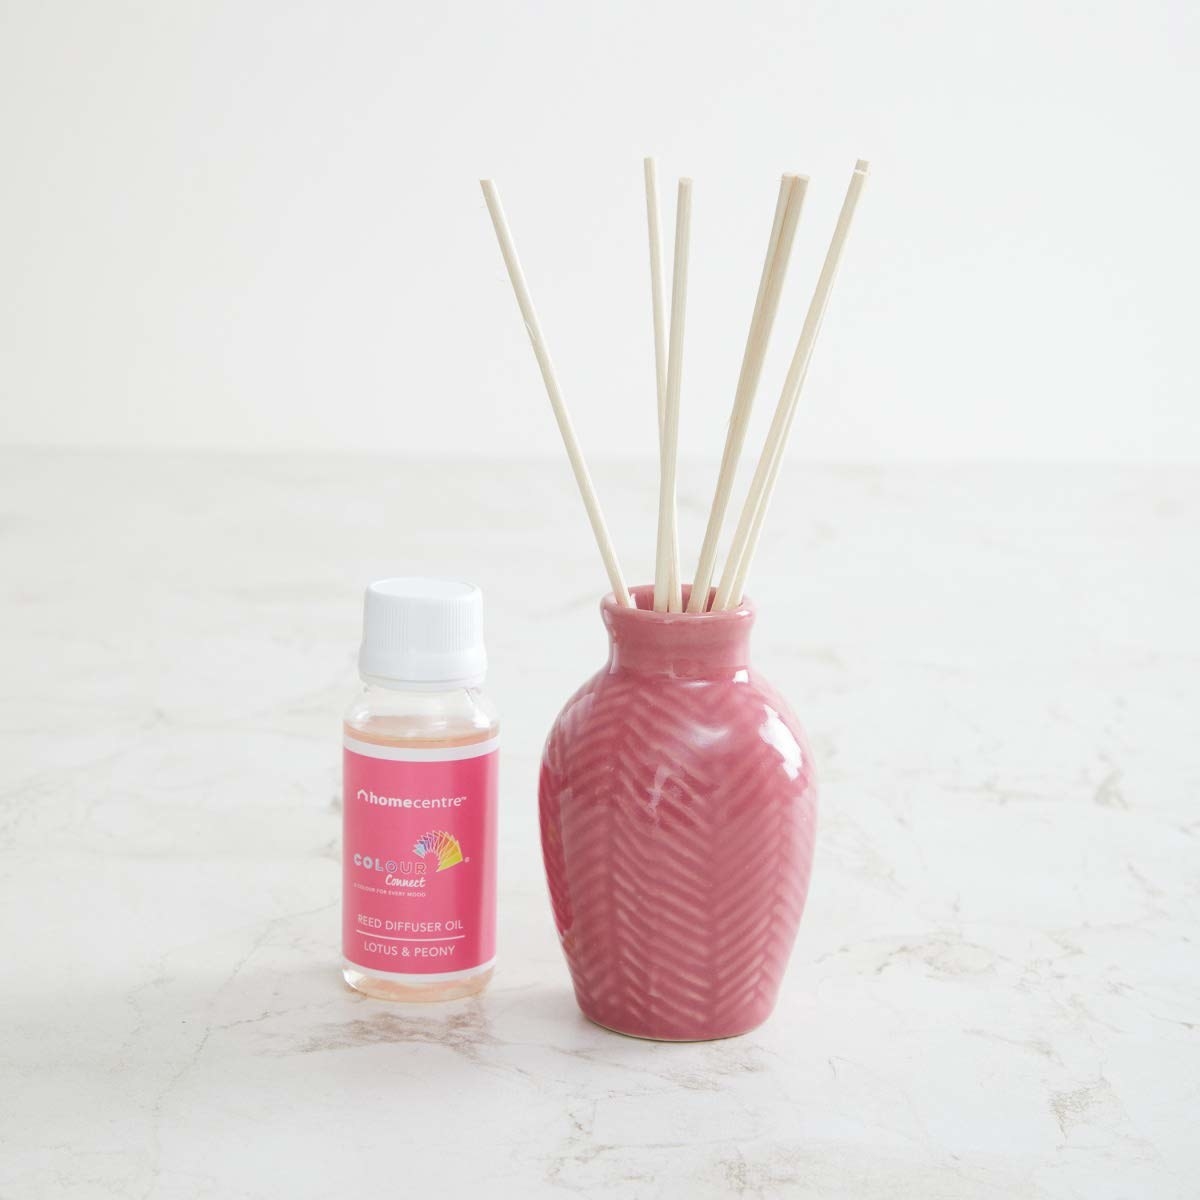 The reed sticks are placed in pink ceramic pot, and there&#x27;s a bottle of diffuser oil placed next to it.